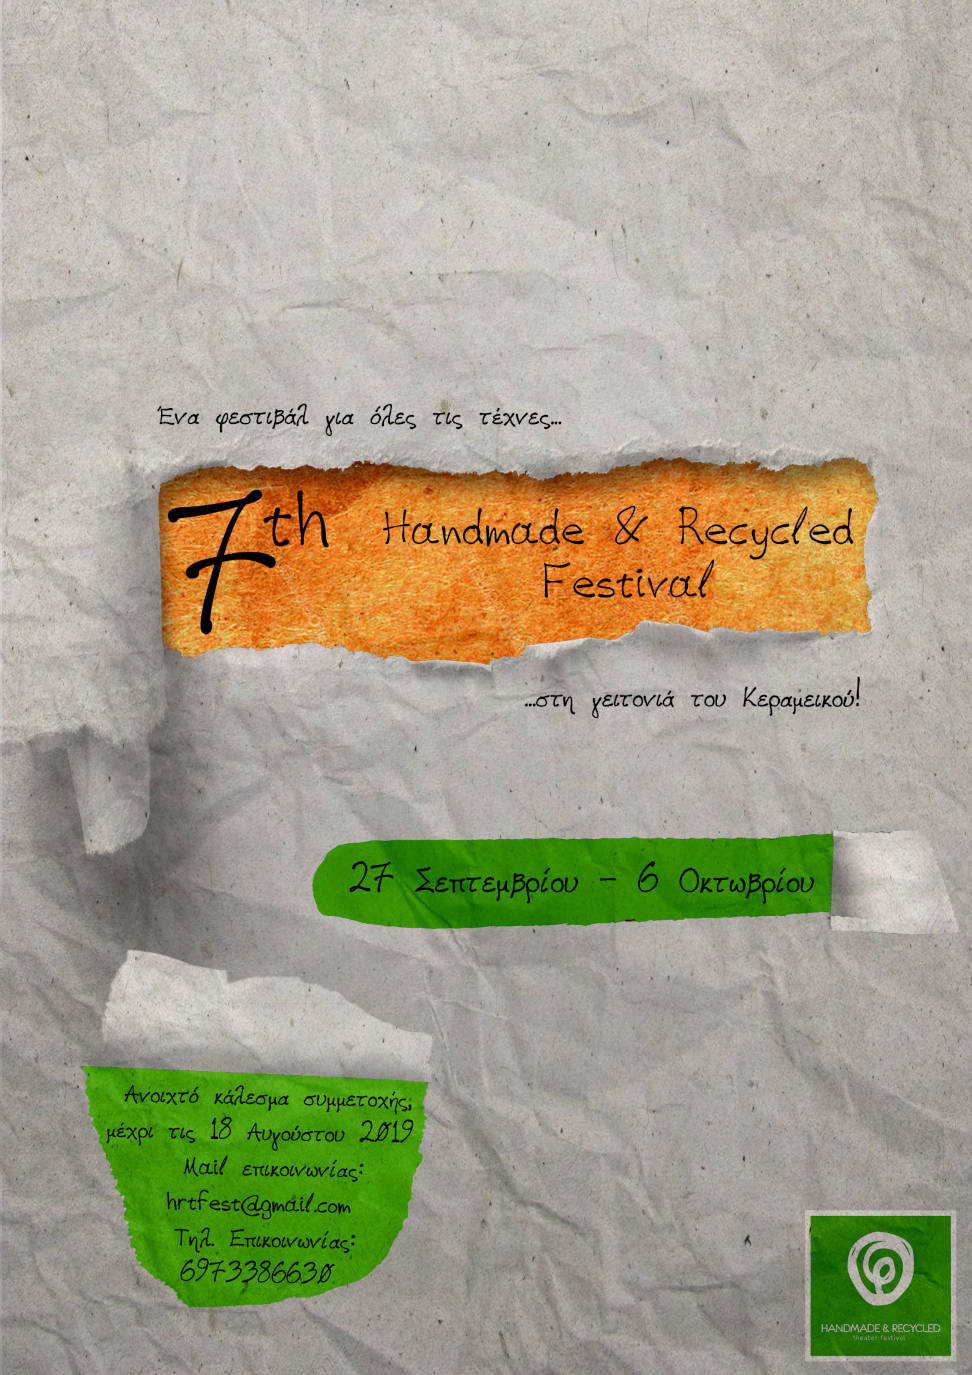 7th_handmade_and_recycled_theater_festival_afisa_7ο φεστιβάλ